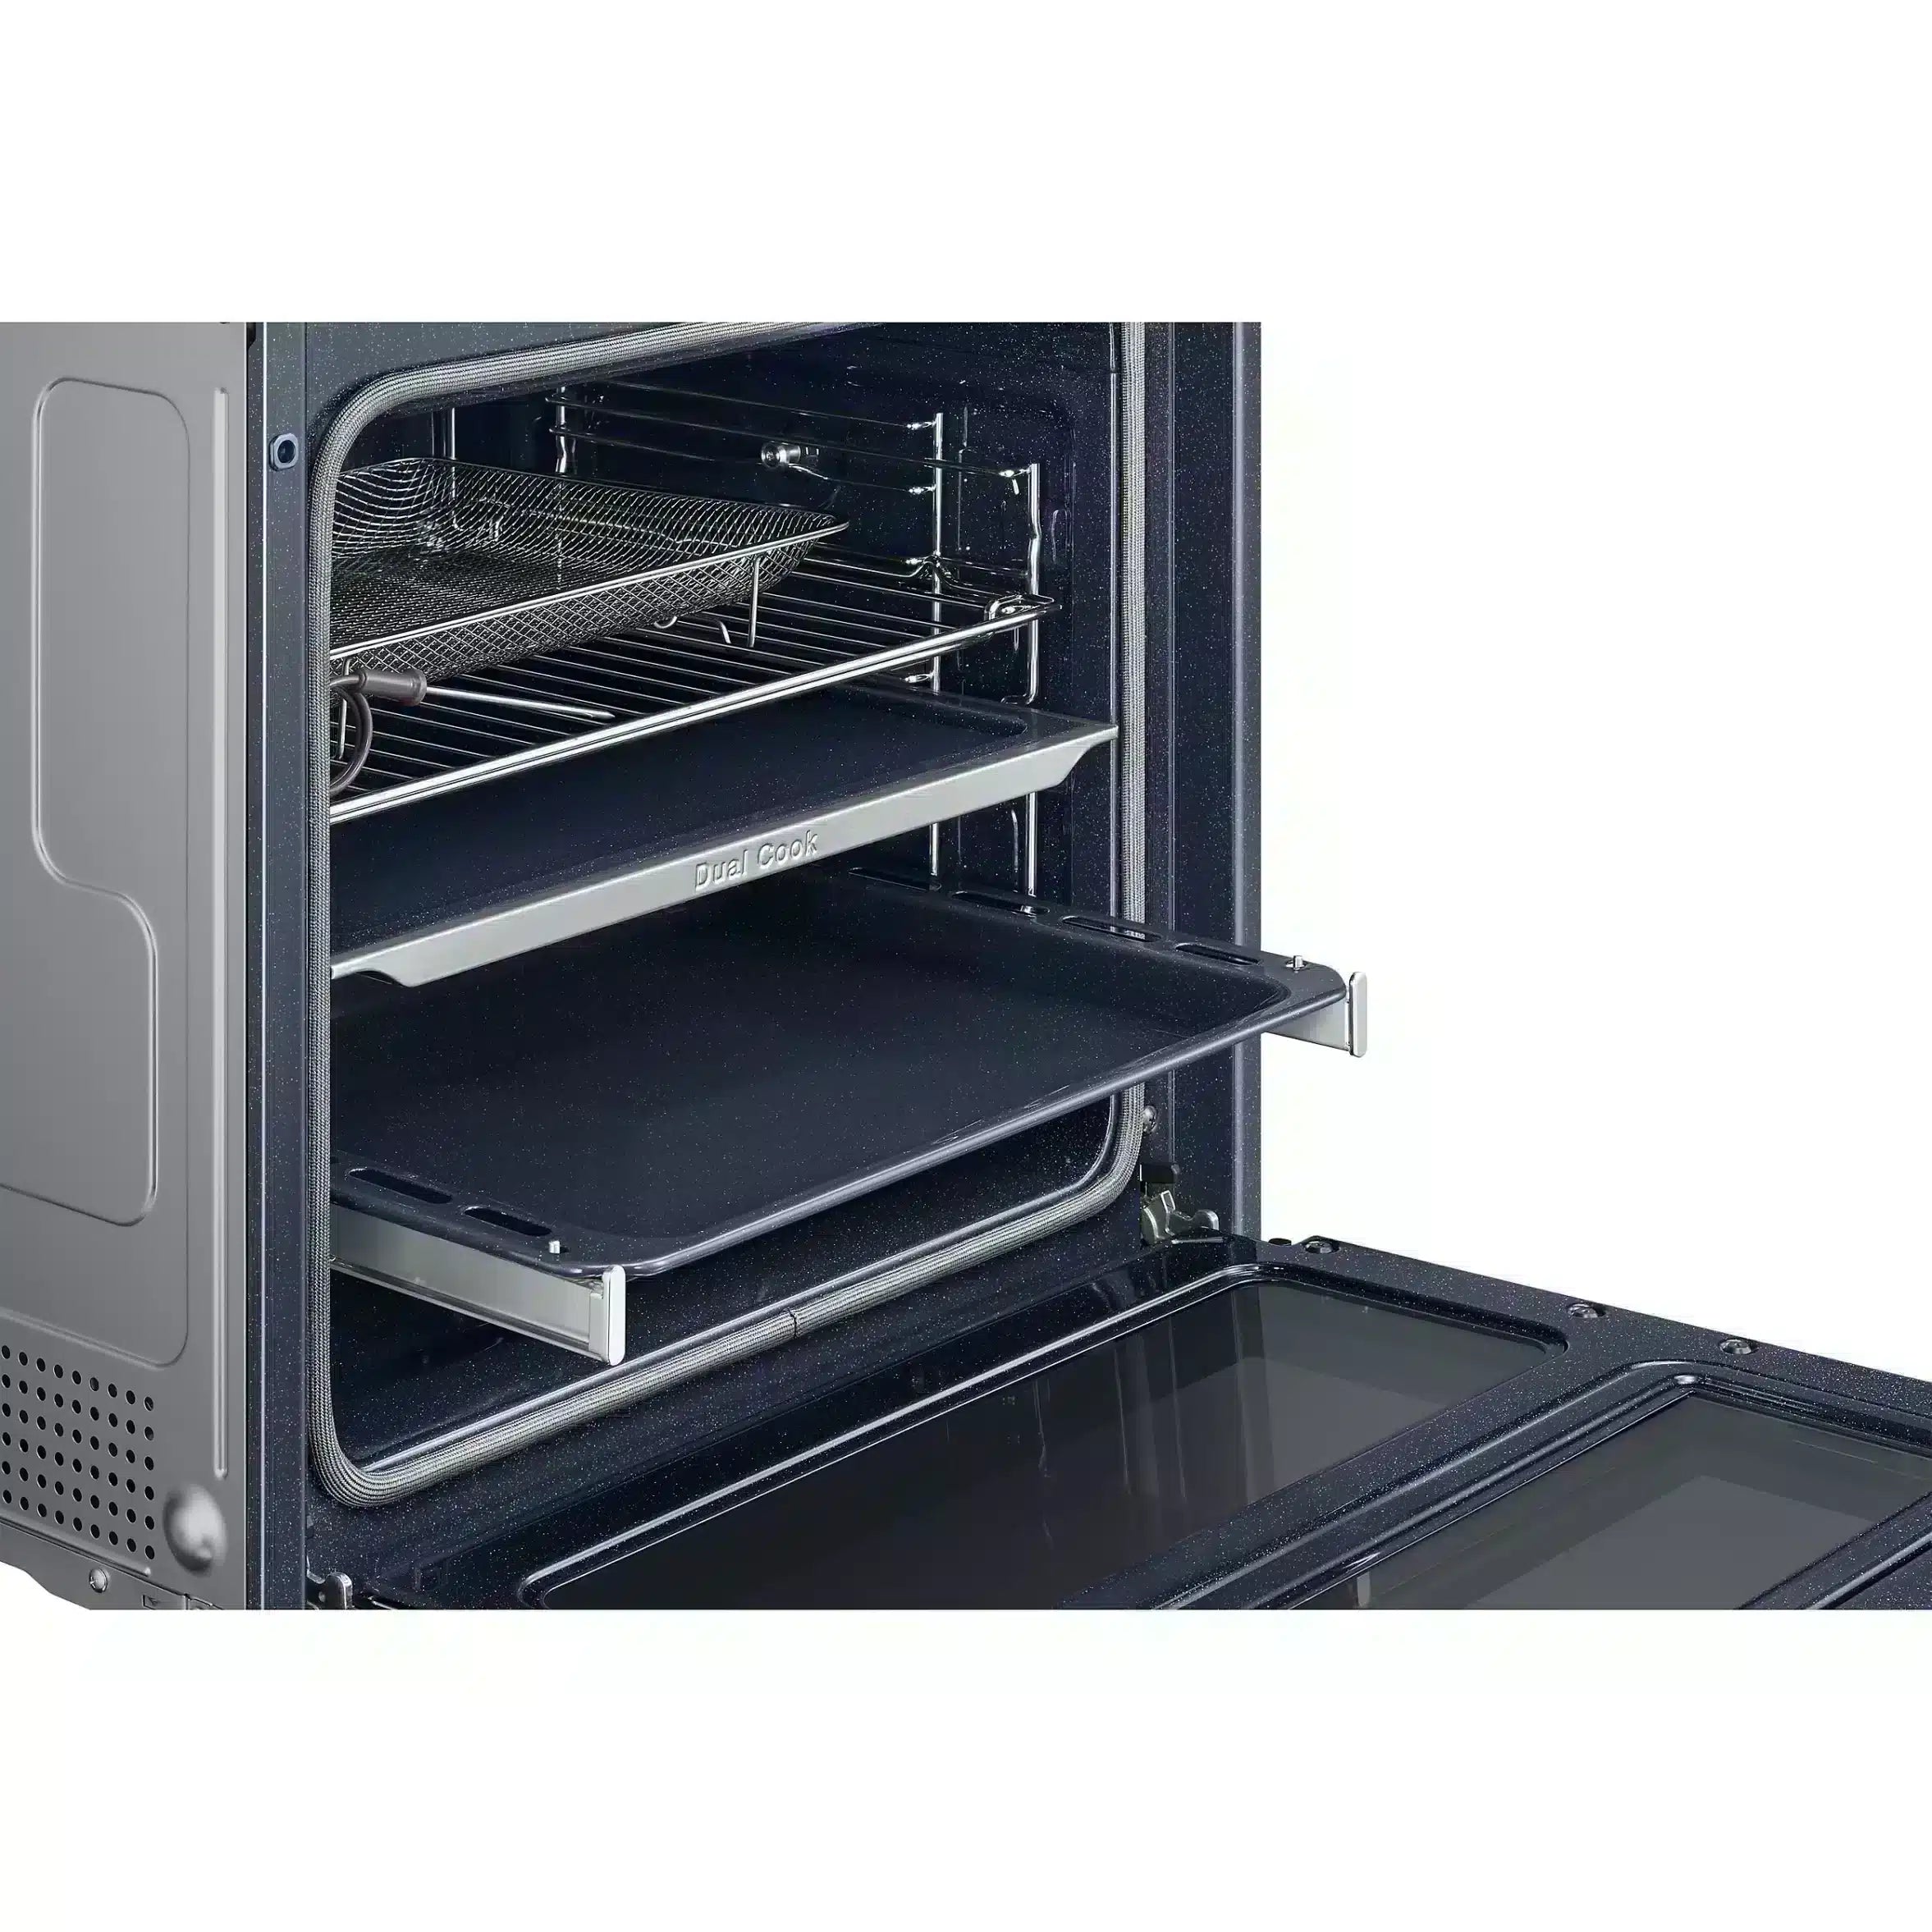 Samsung Series 5 Dual Cook Flex™Built-in Single Steam Oven - Stainless steel effect-7686